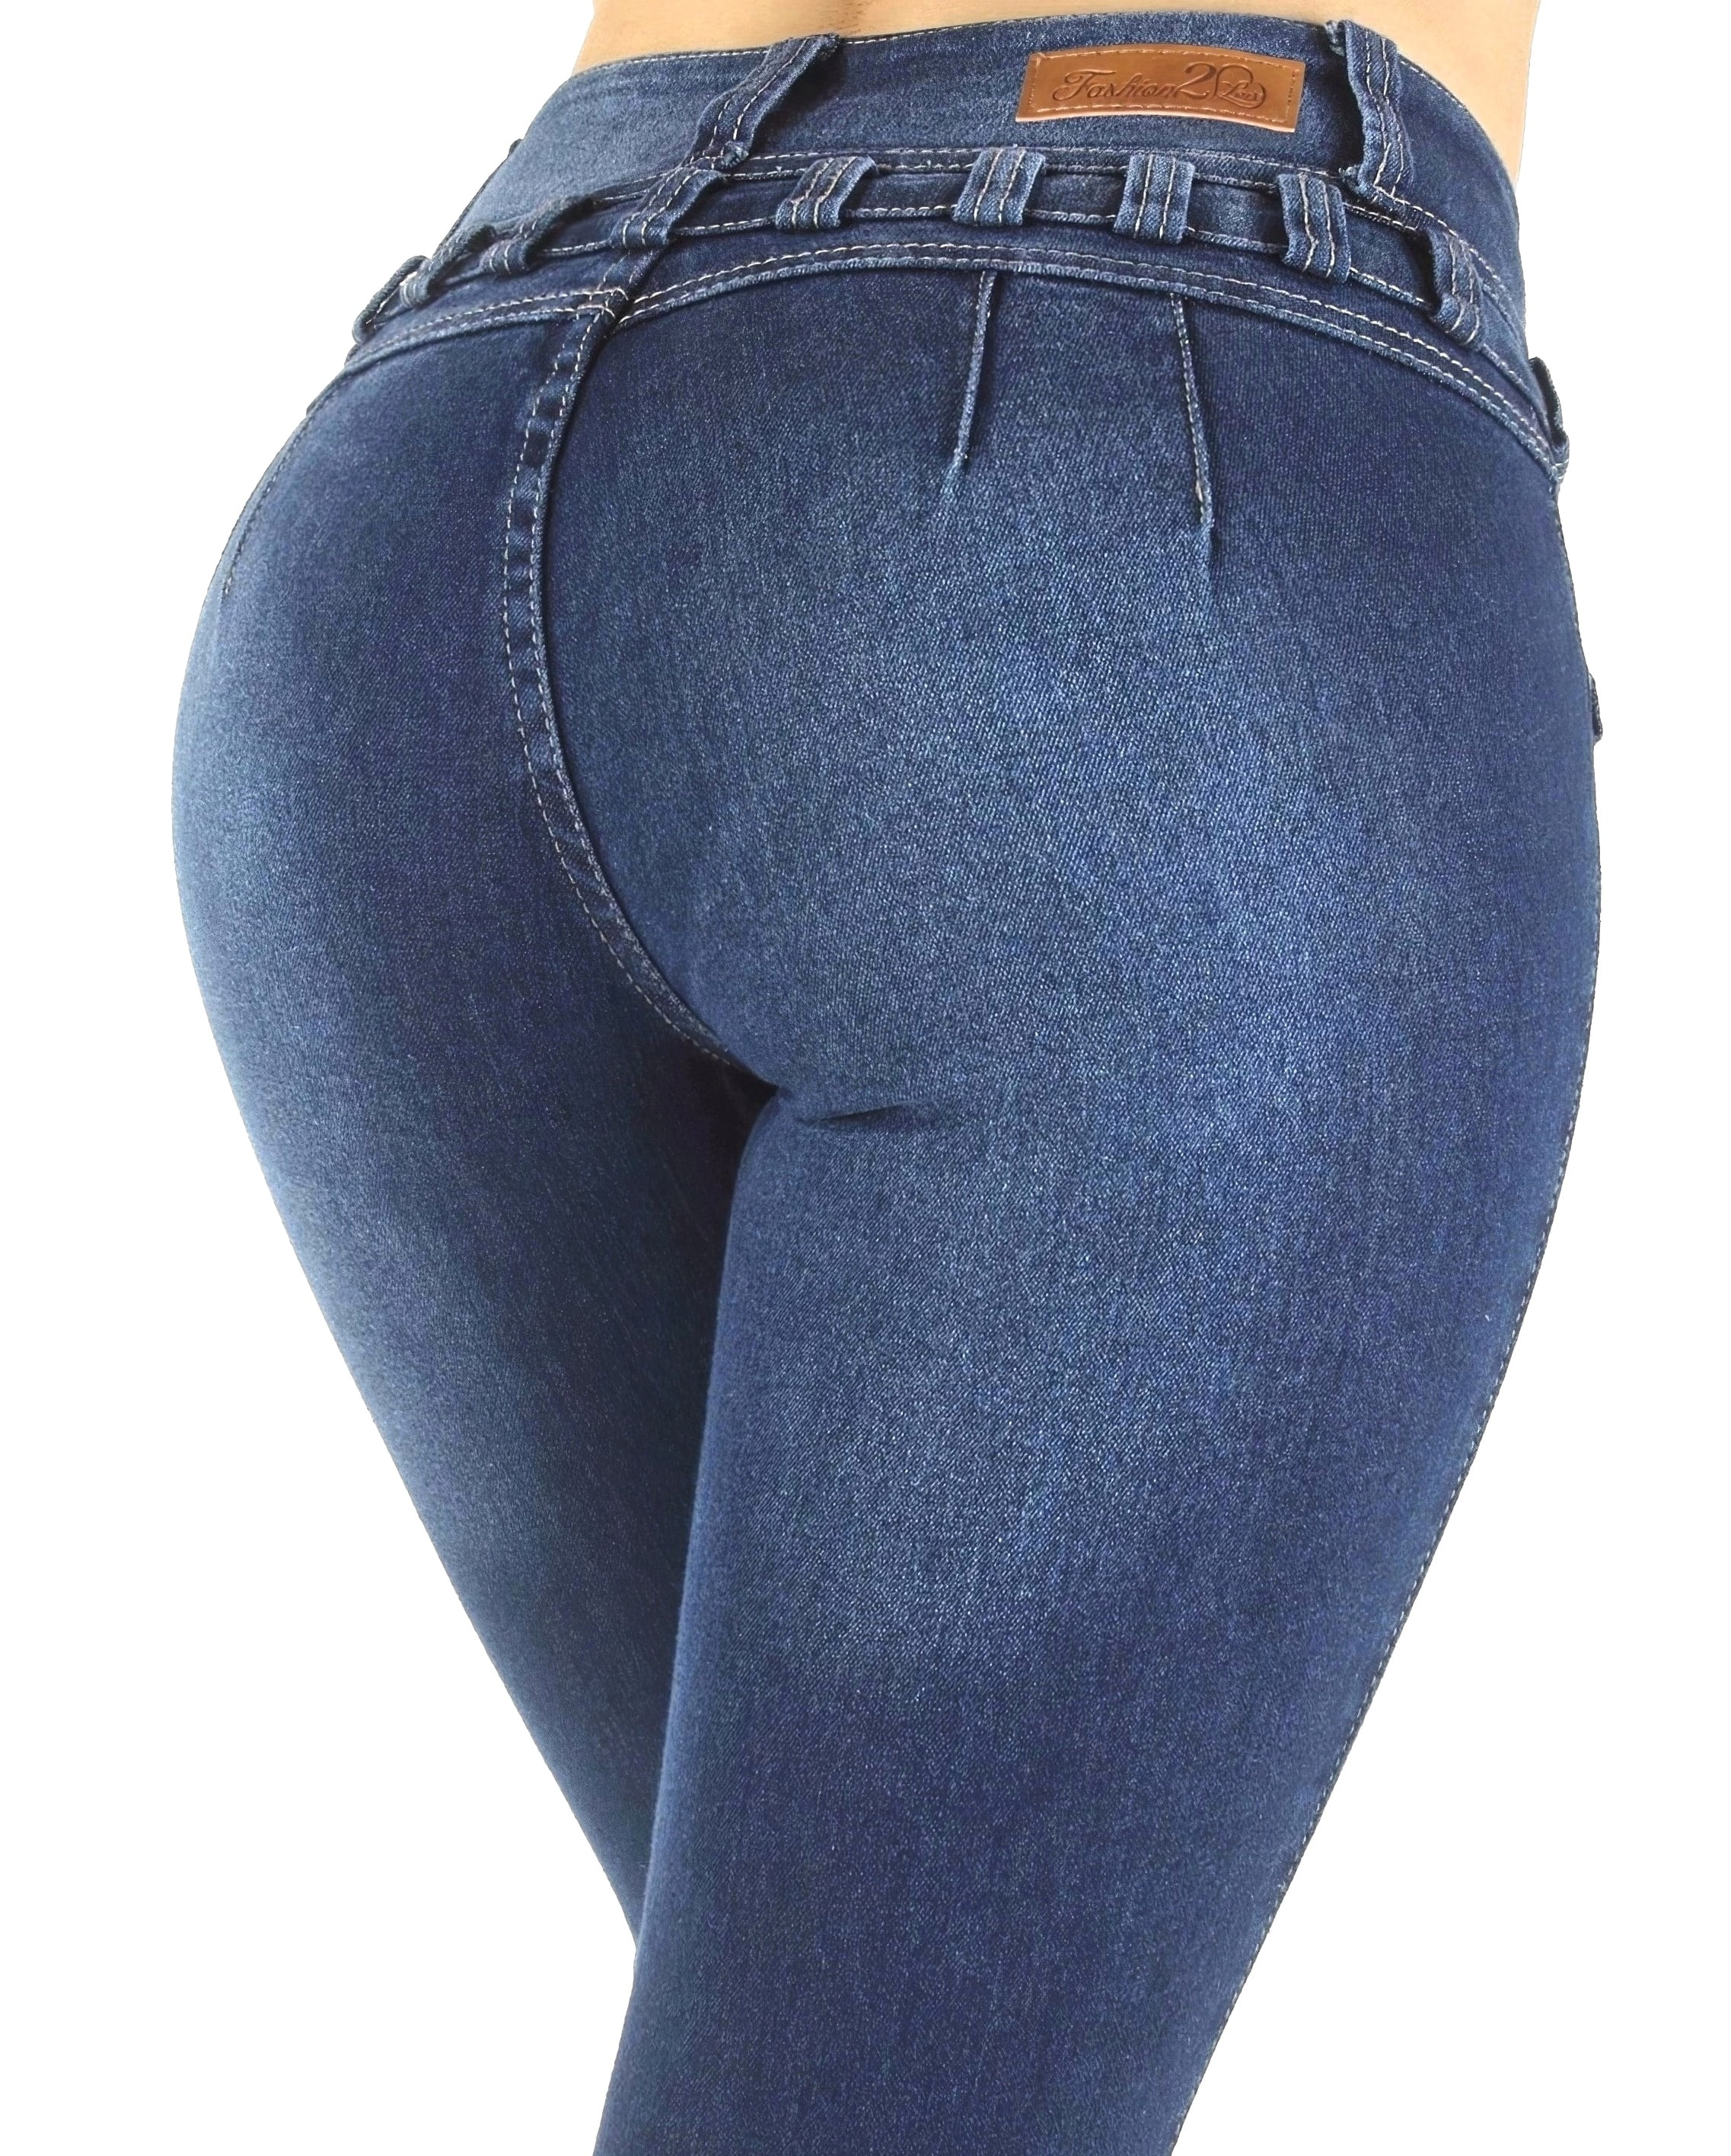 Details about   High Waist Stretch Push-Up Colombian Style Levanta Cola Skinny Jeans  DJ3187 